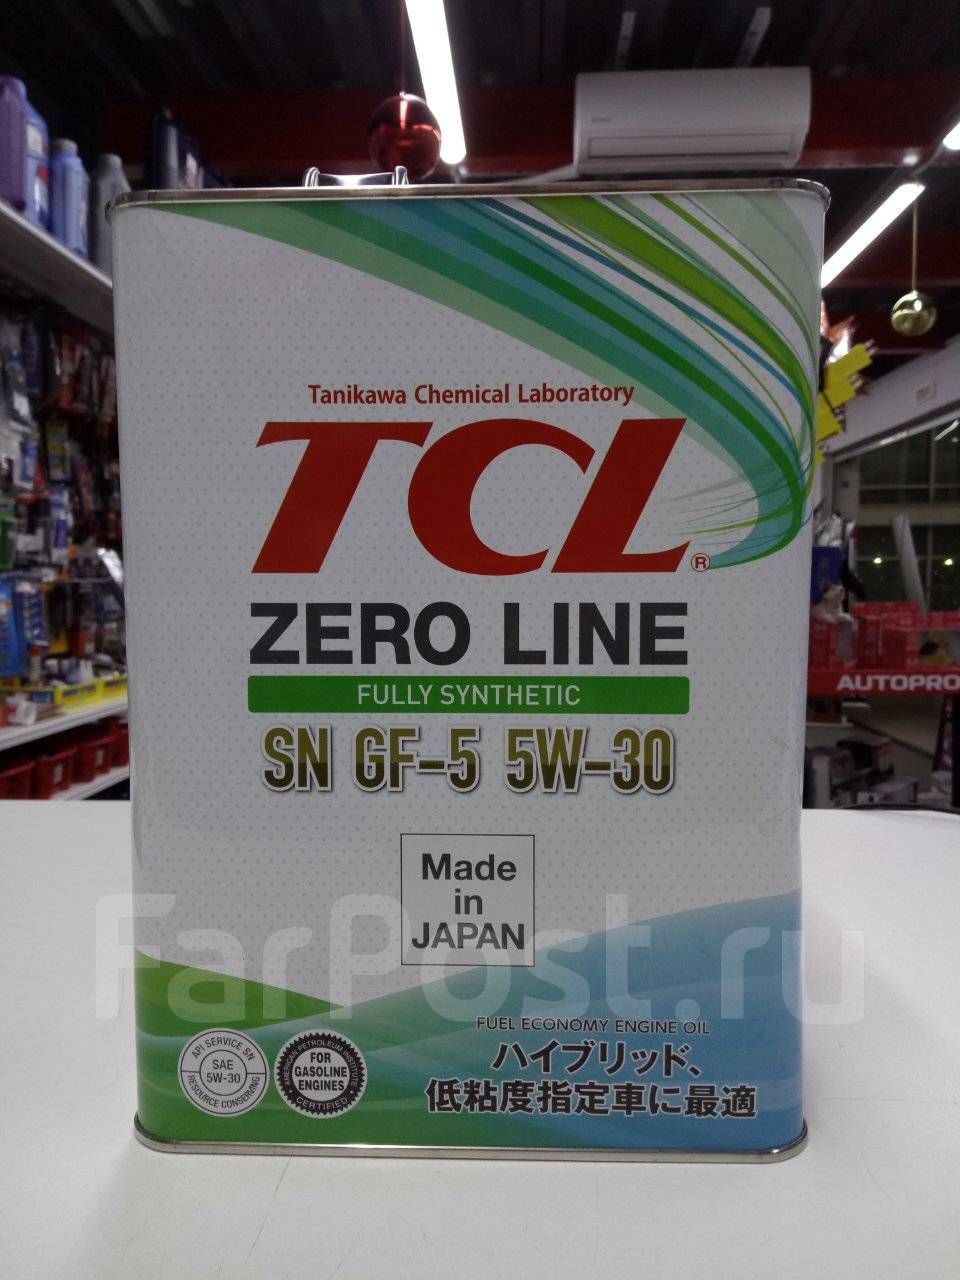 Моторное масло tcl 5w30. TCL Zero line 5w30. Масло TCL Zero line 5w-30. TCL 5w30 SP. Масло моторное TCL Zero line 5w20.